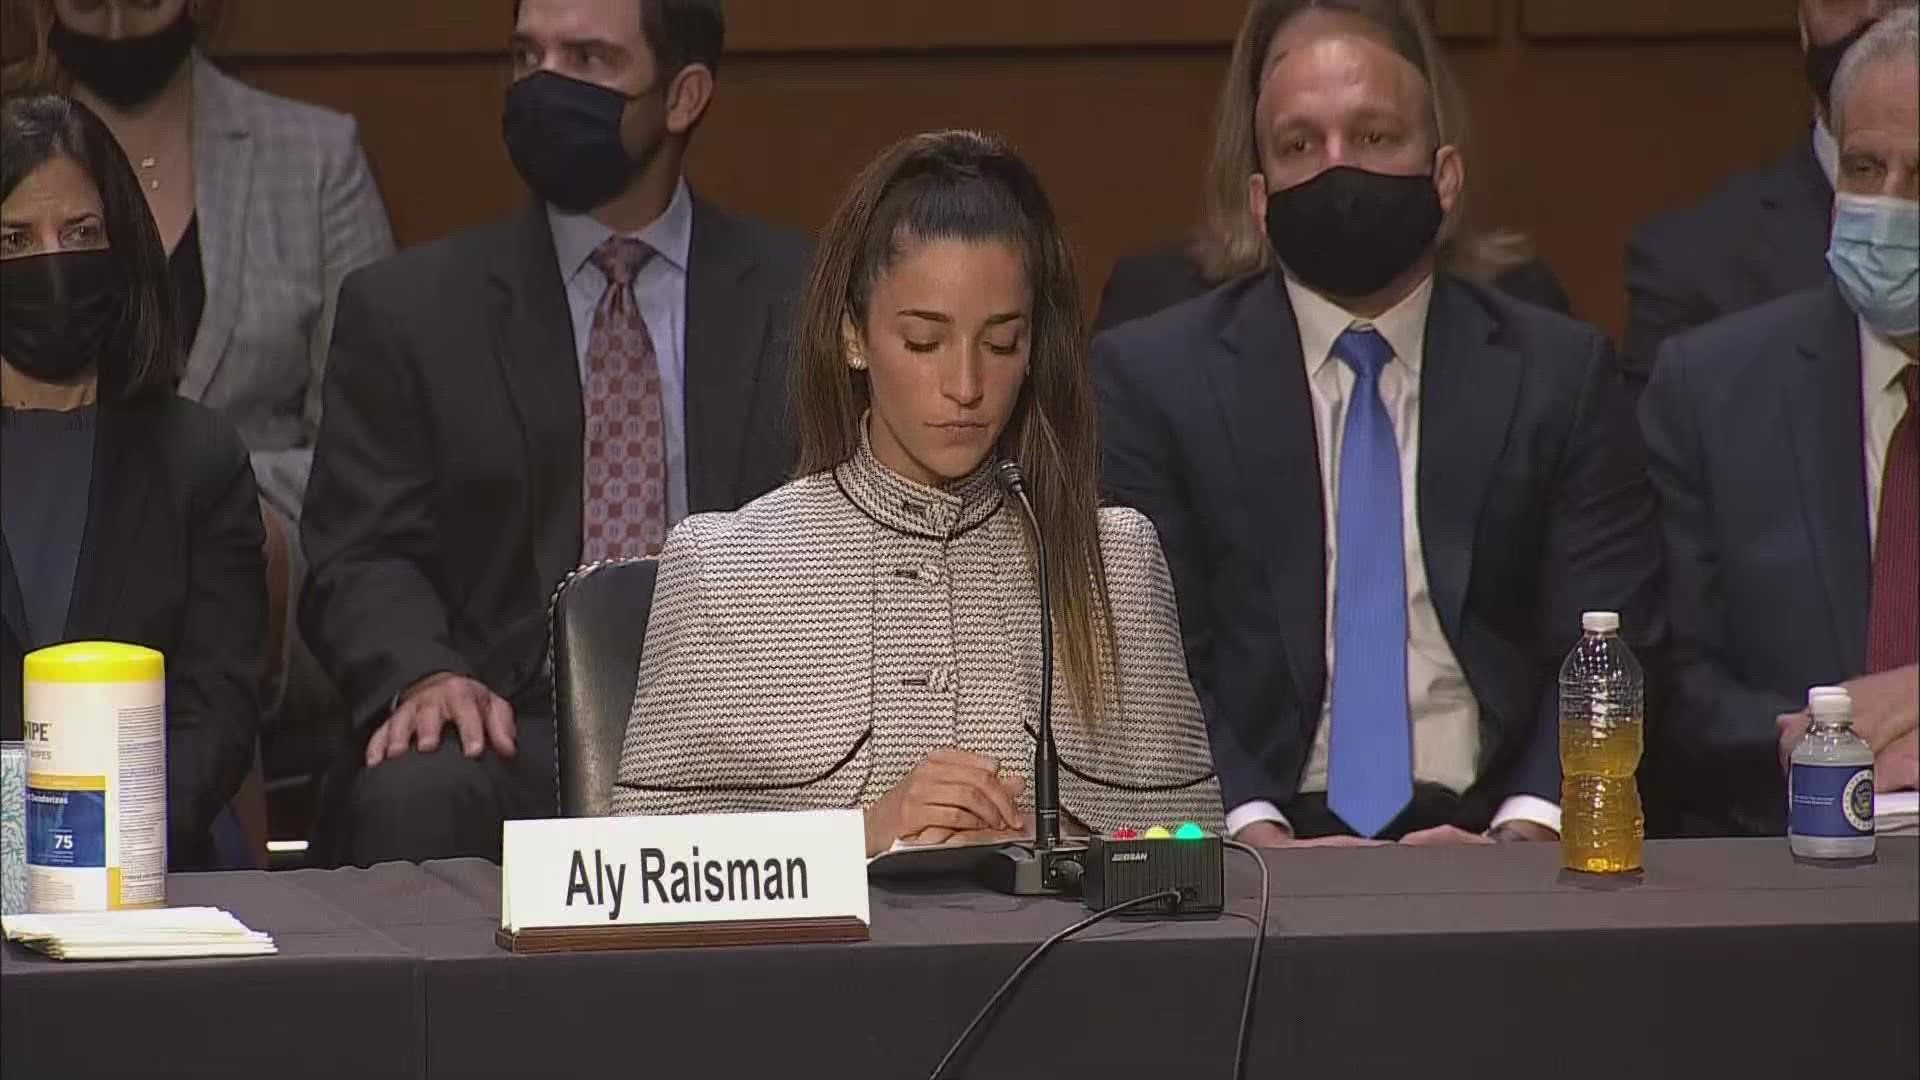 "Given our abuser's unfettered access to children, stopping him should have been a priority," gold medalist Aly Raisman said in her testimony.